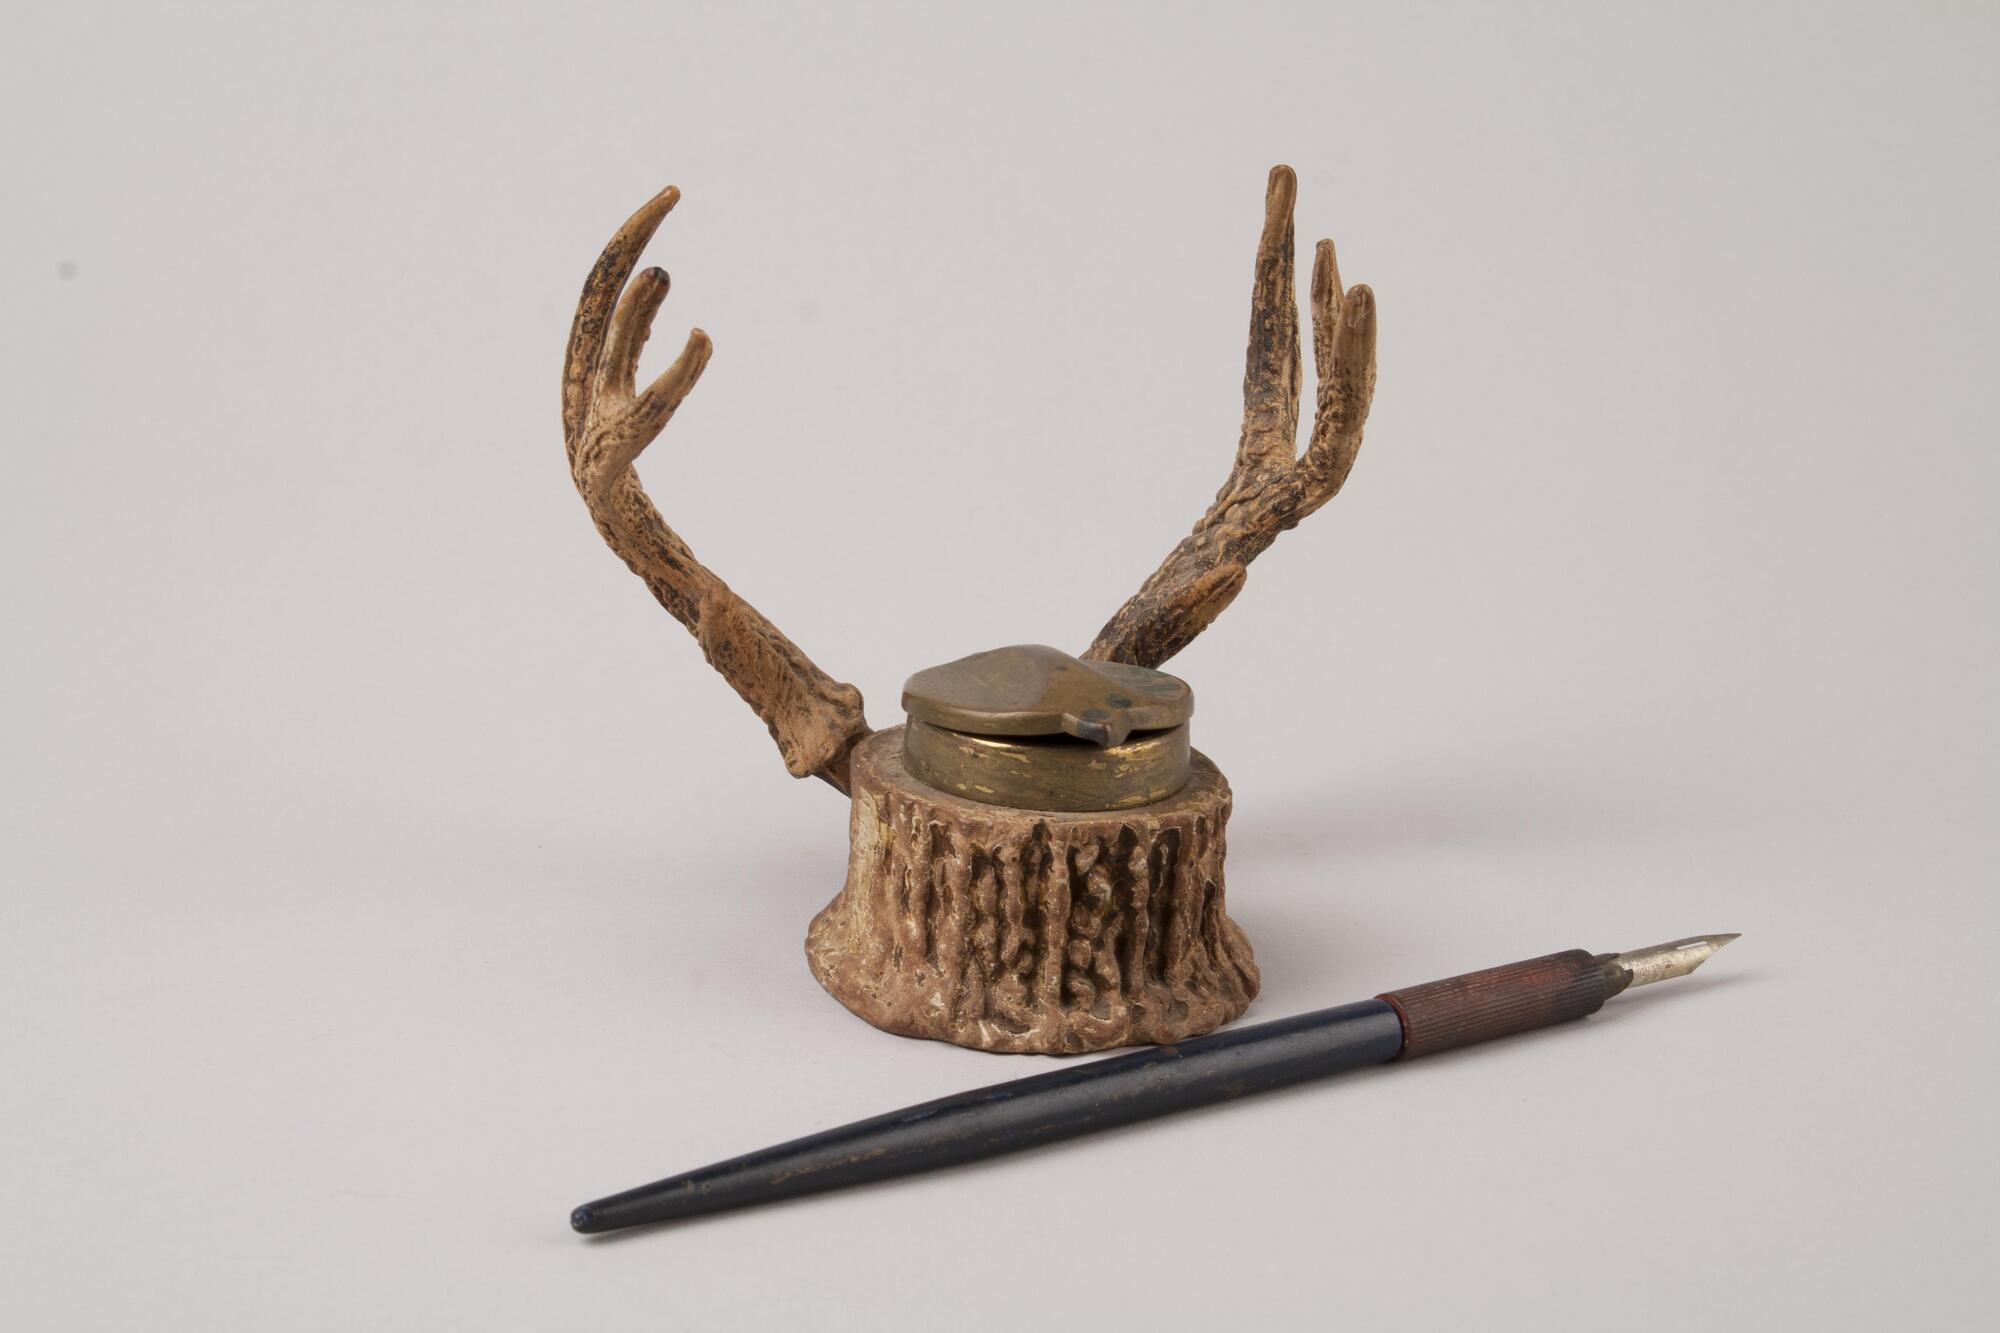 A small inkwell in a shape of a deer head has two deer horns of the left and the right. The two deer horns serve as an alter pen holder for the inkwell.